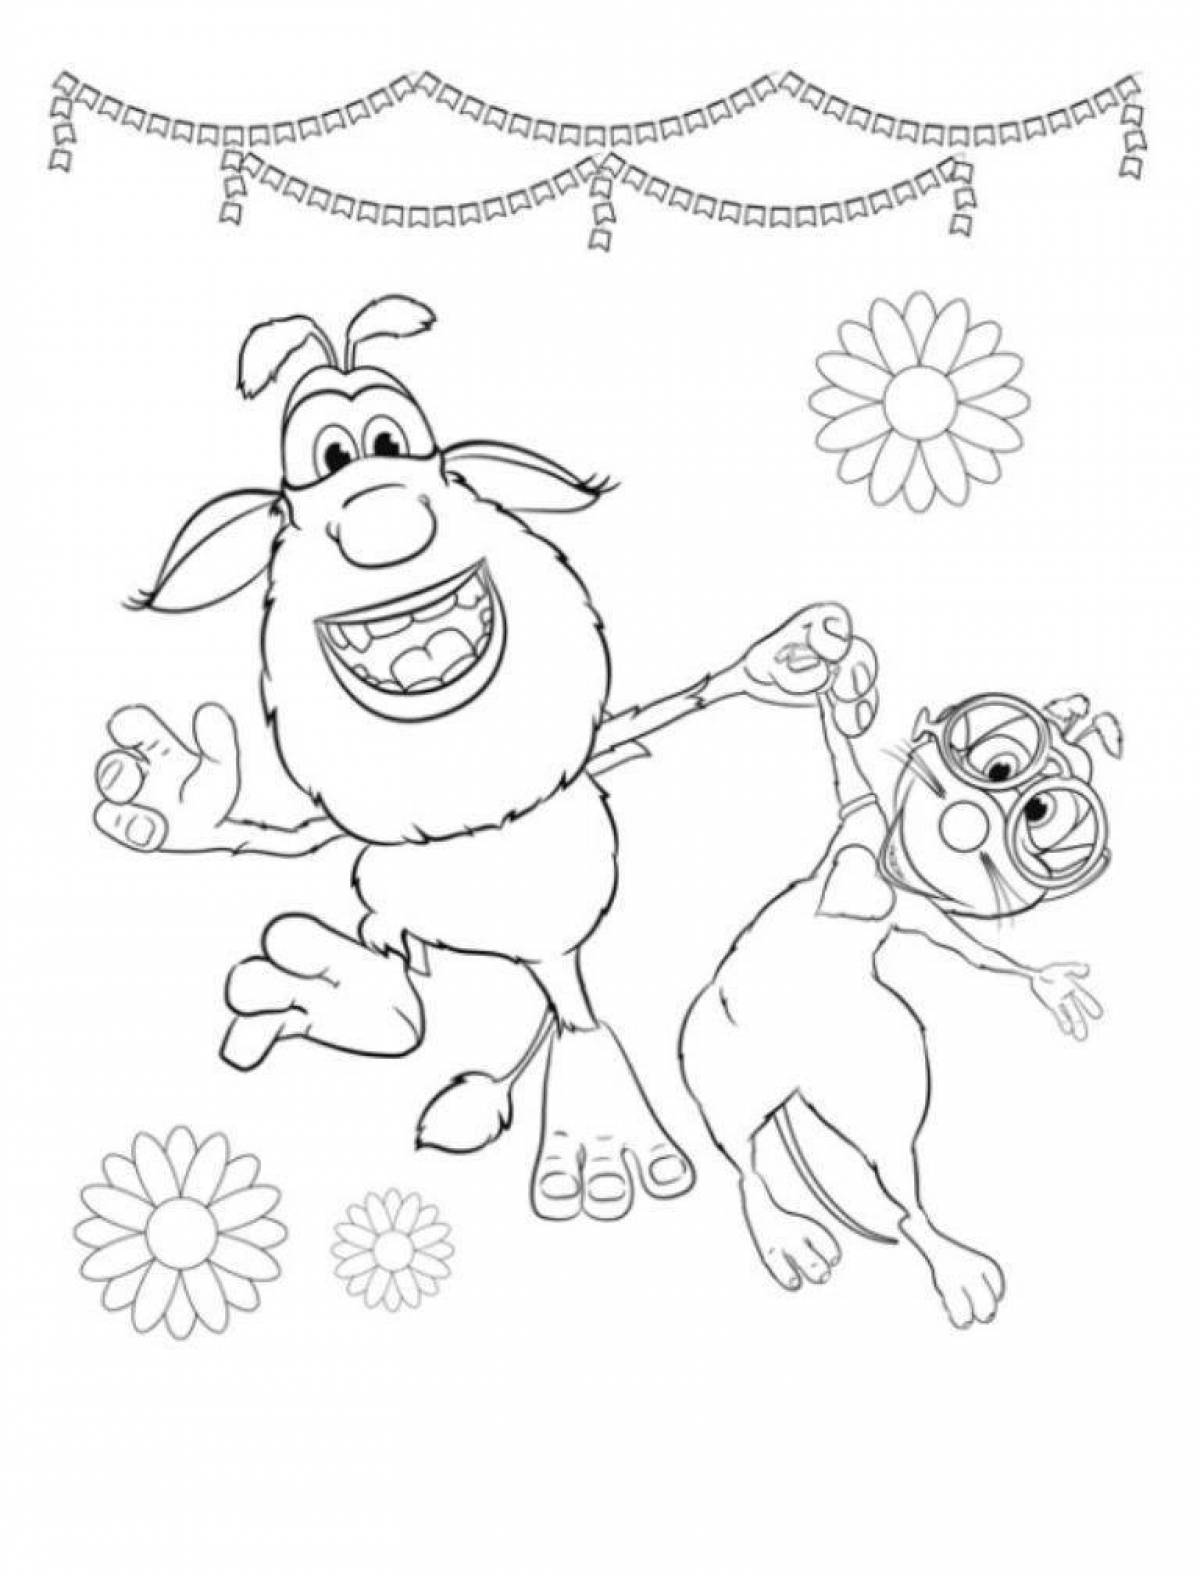 Booba bright coloring for the little ones